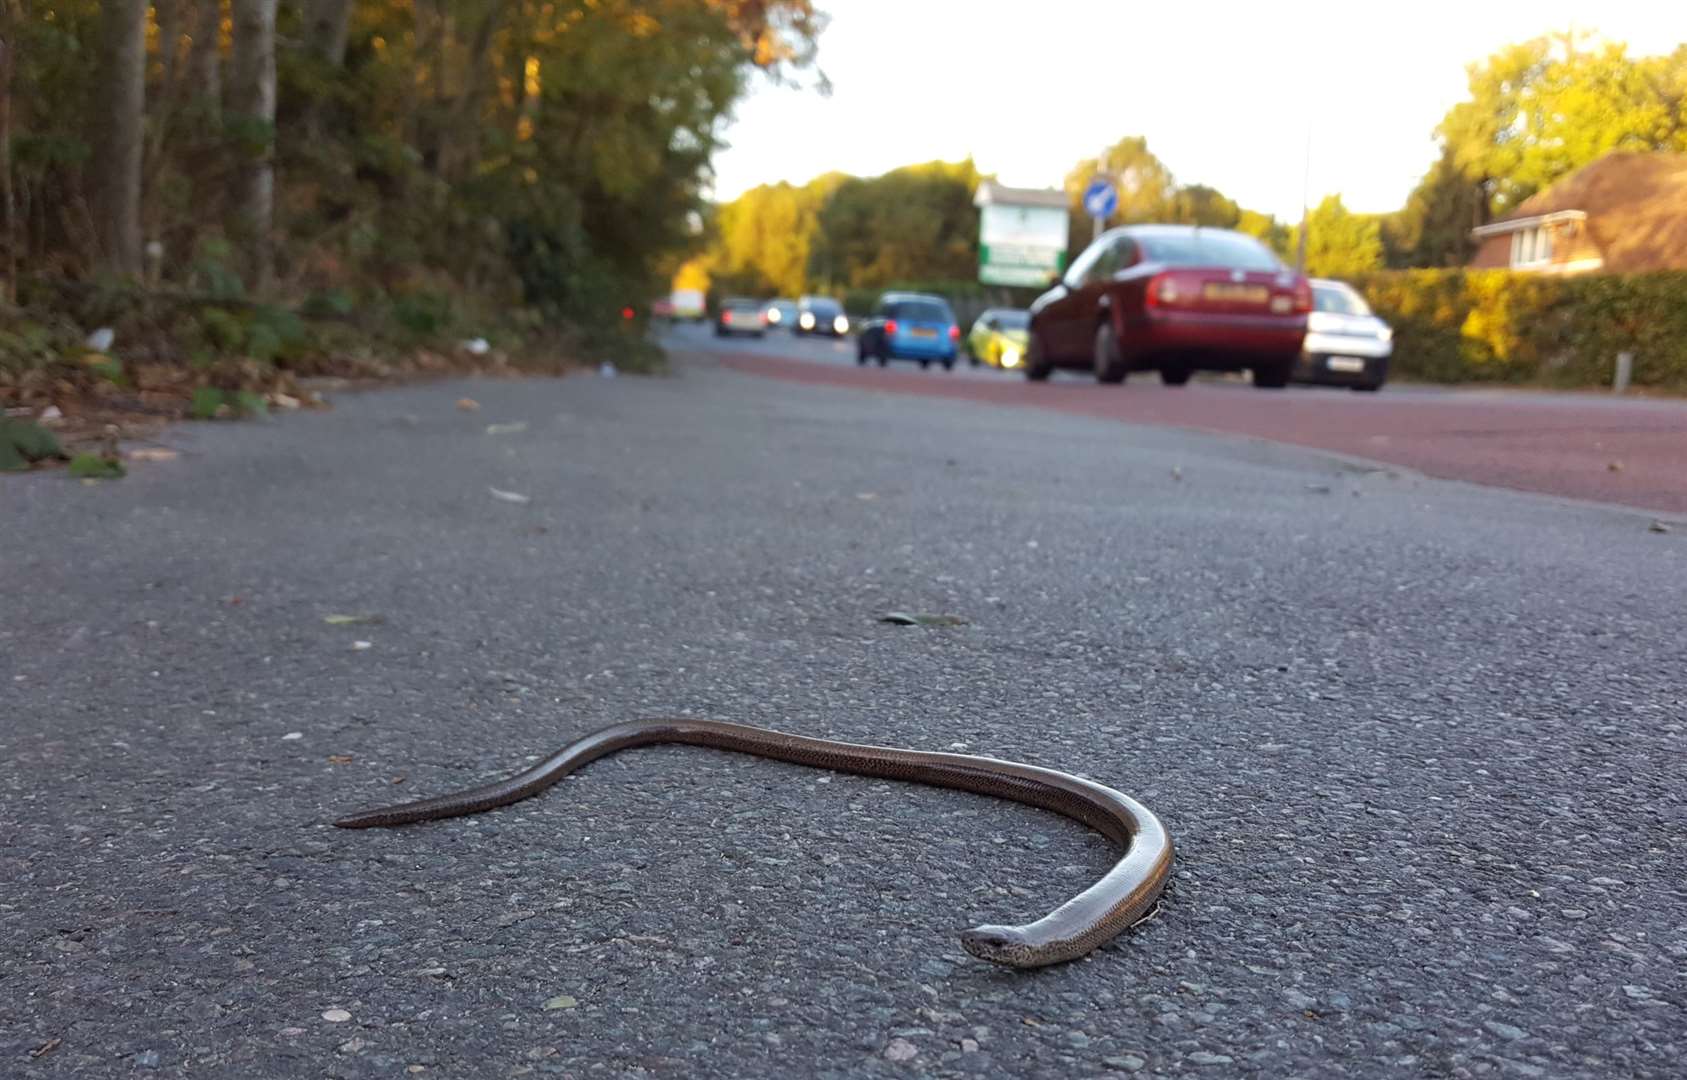 A slow worm on the pavement next to the site, photographed in October 2018